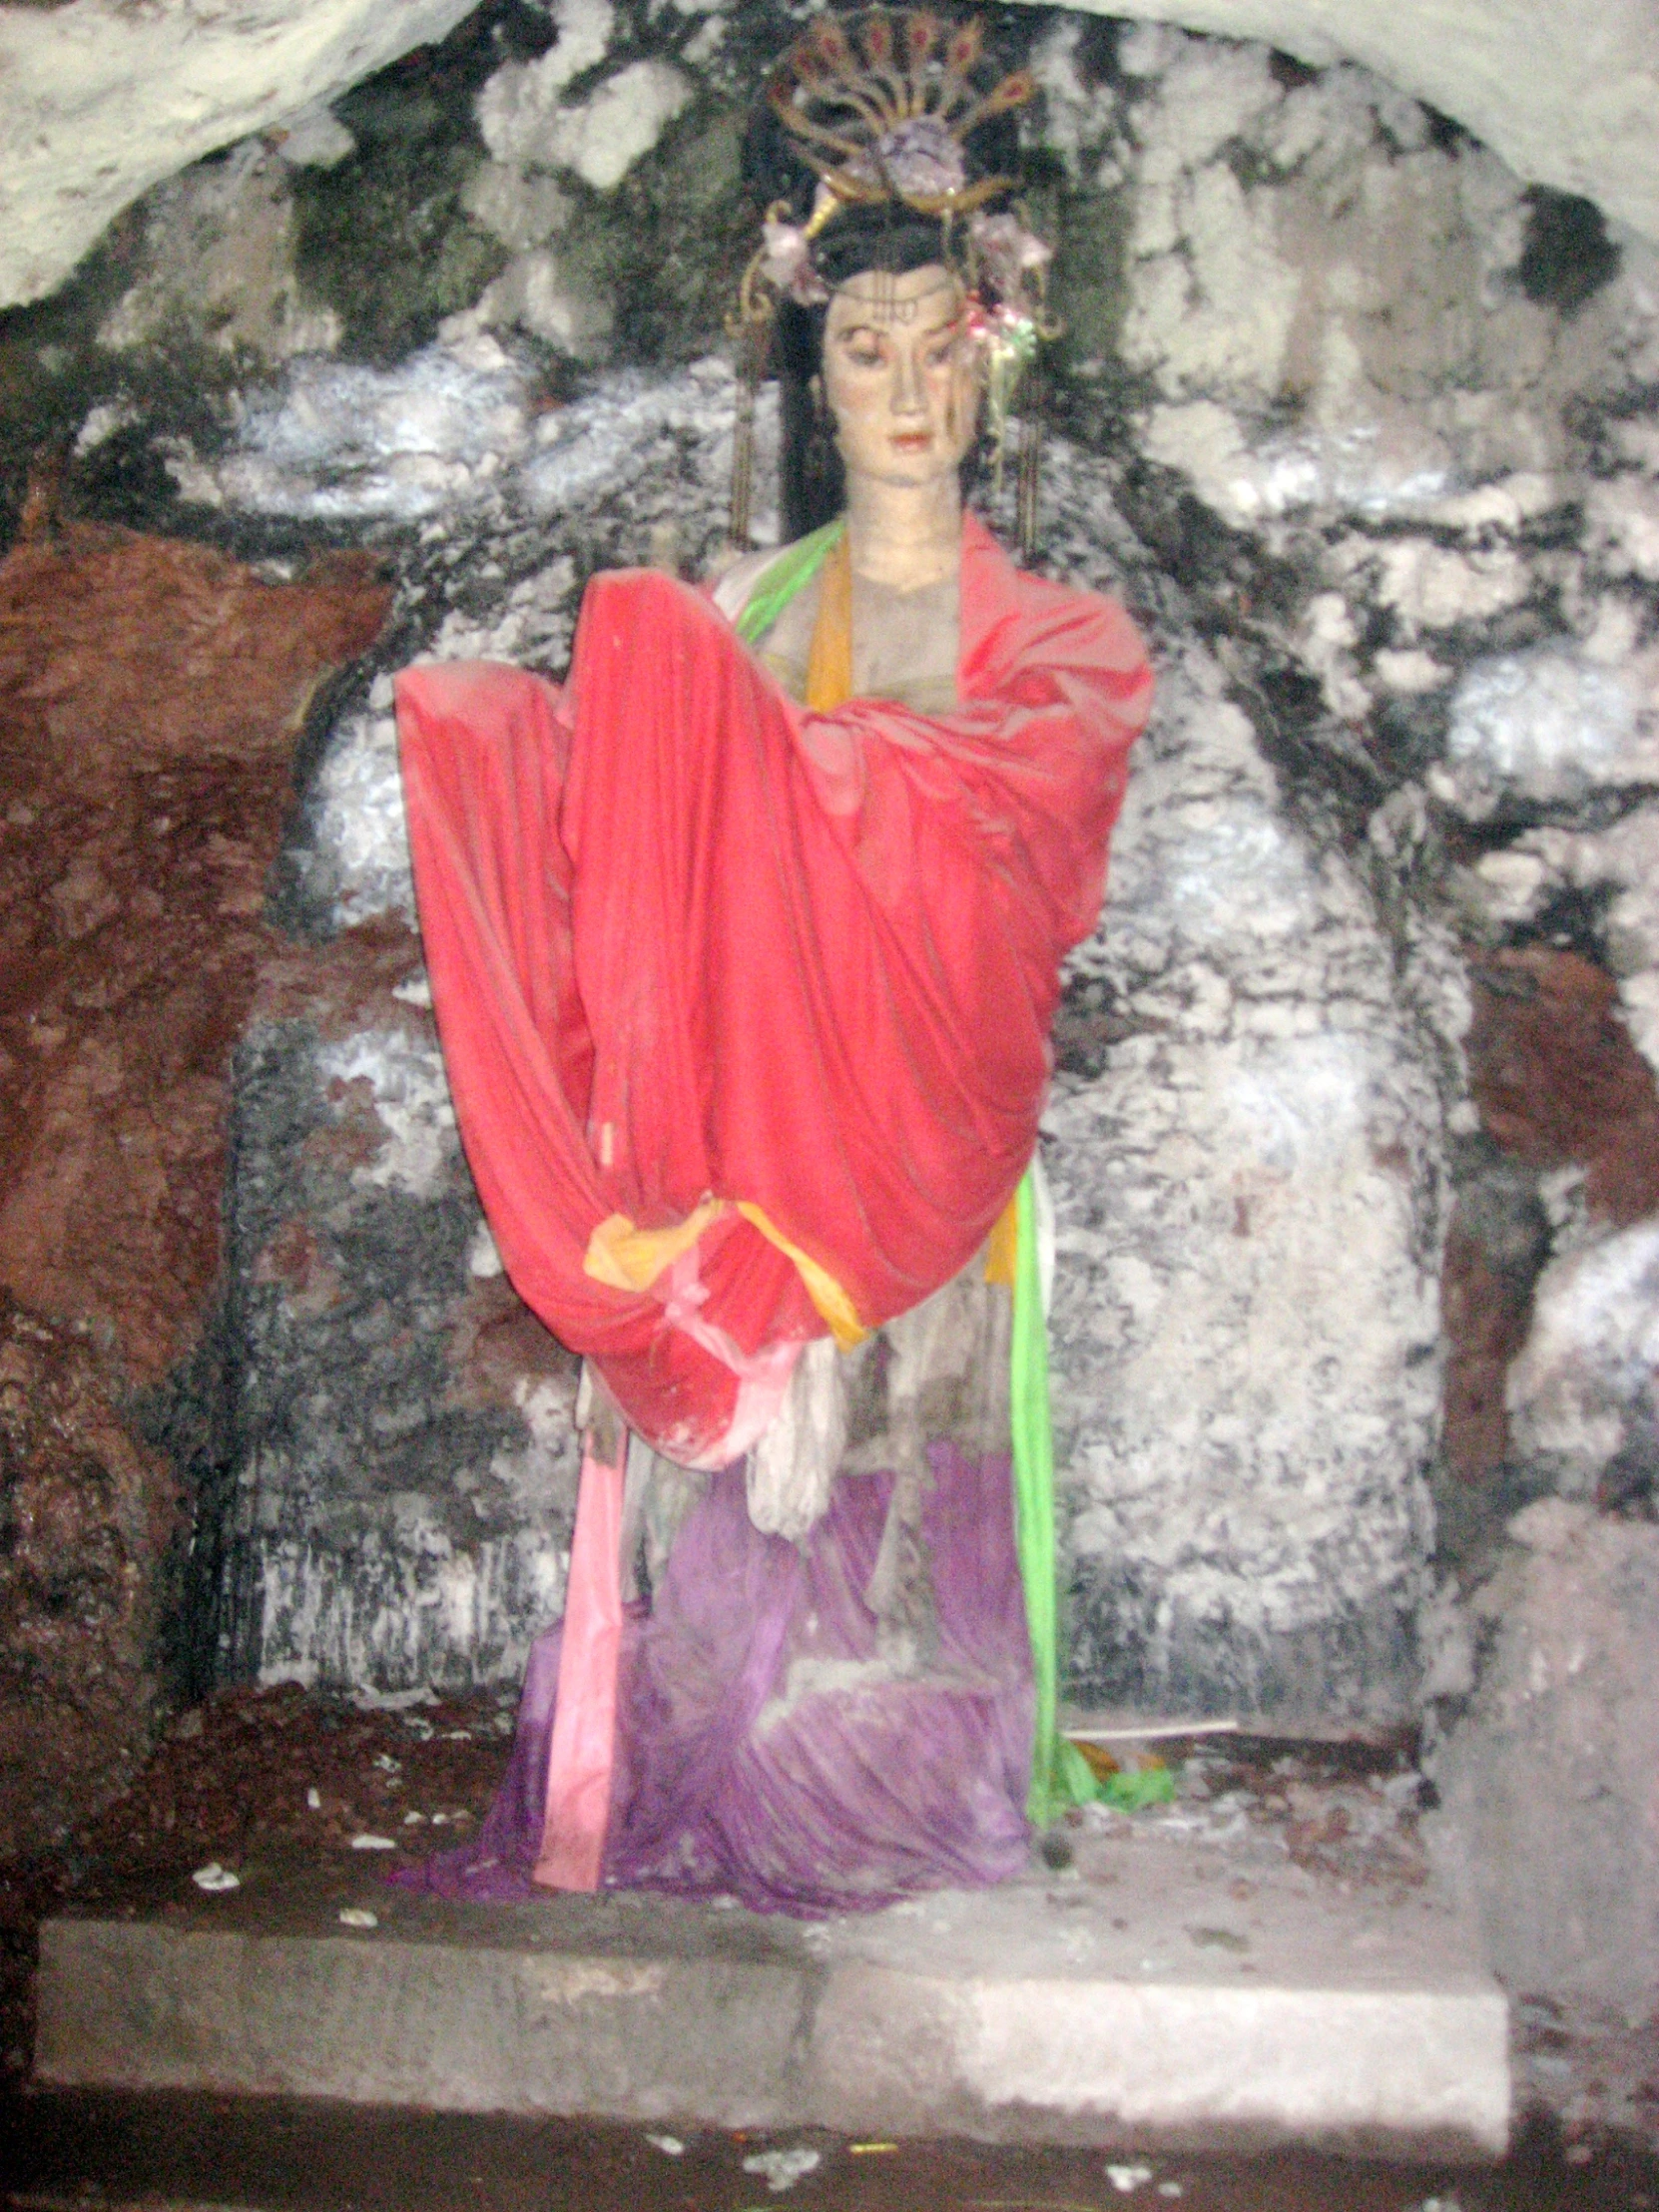 an old statue is wearing a colorful robe